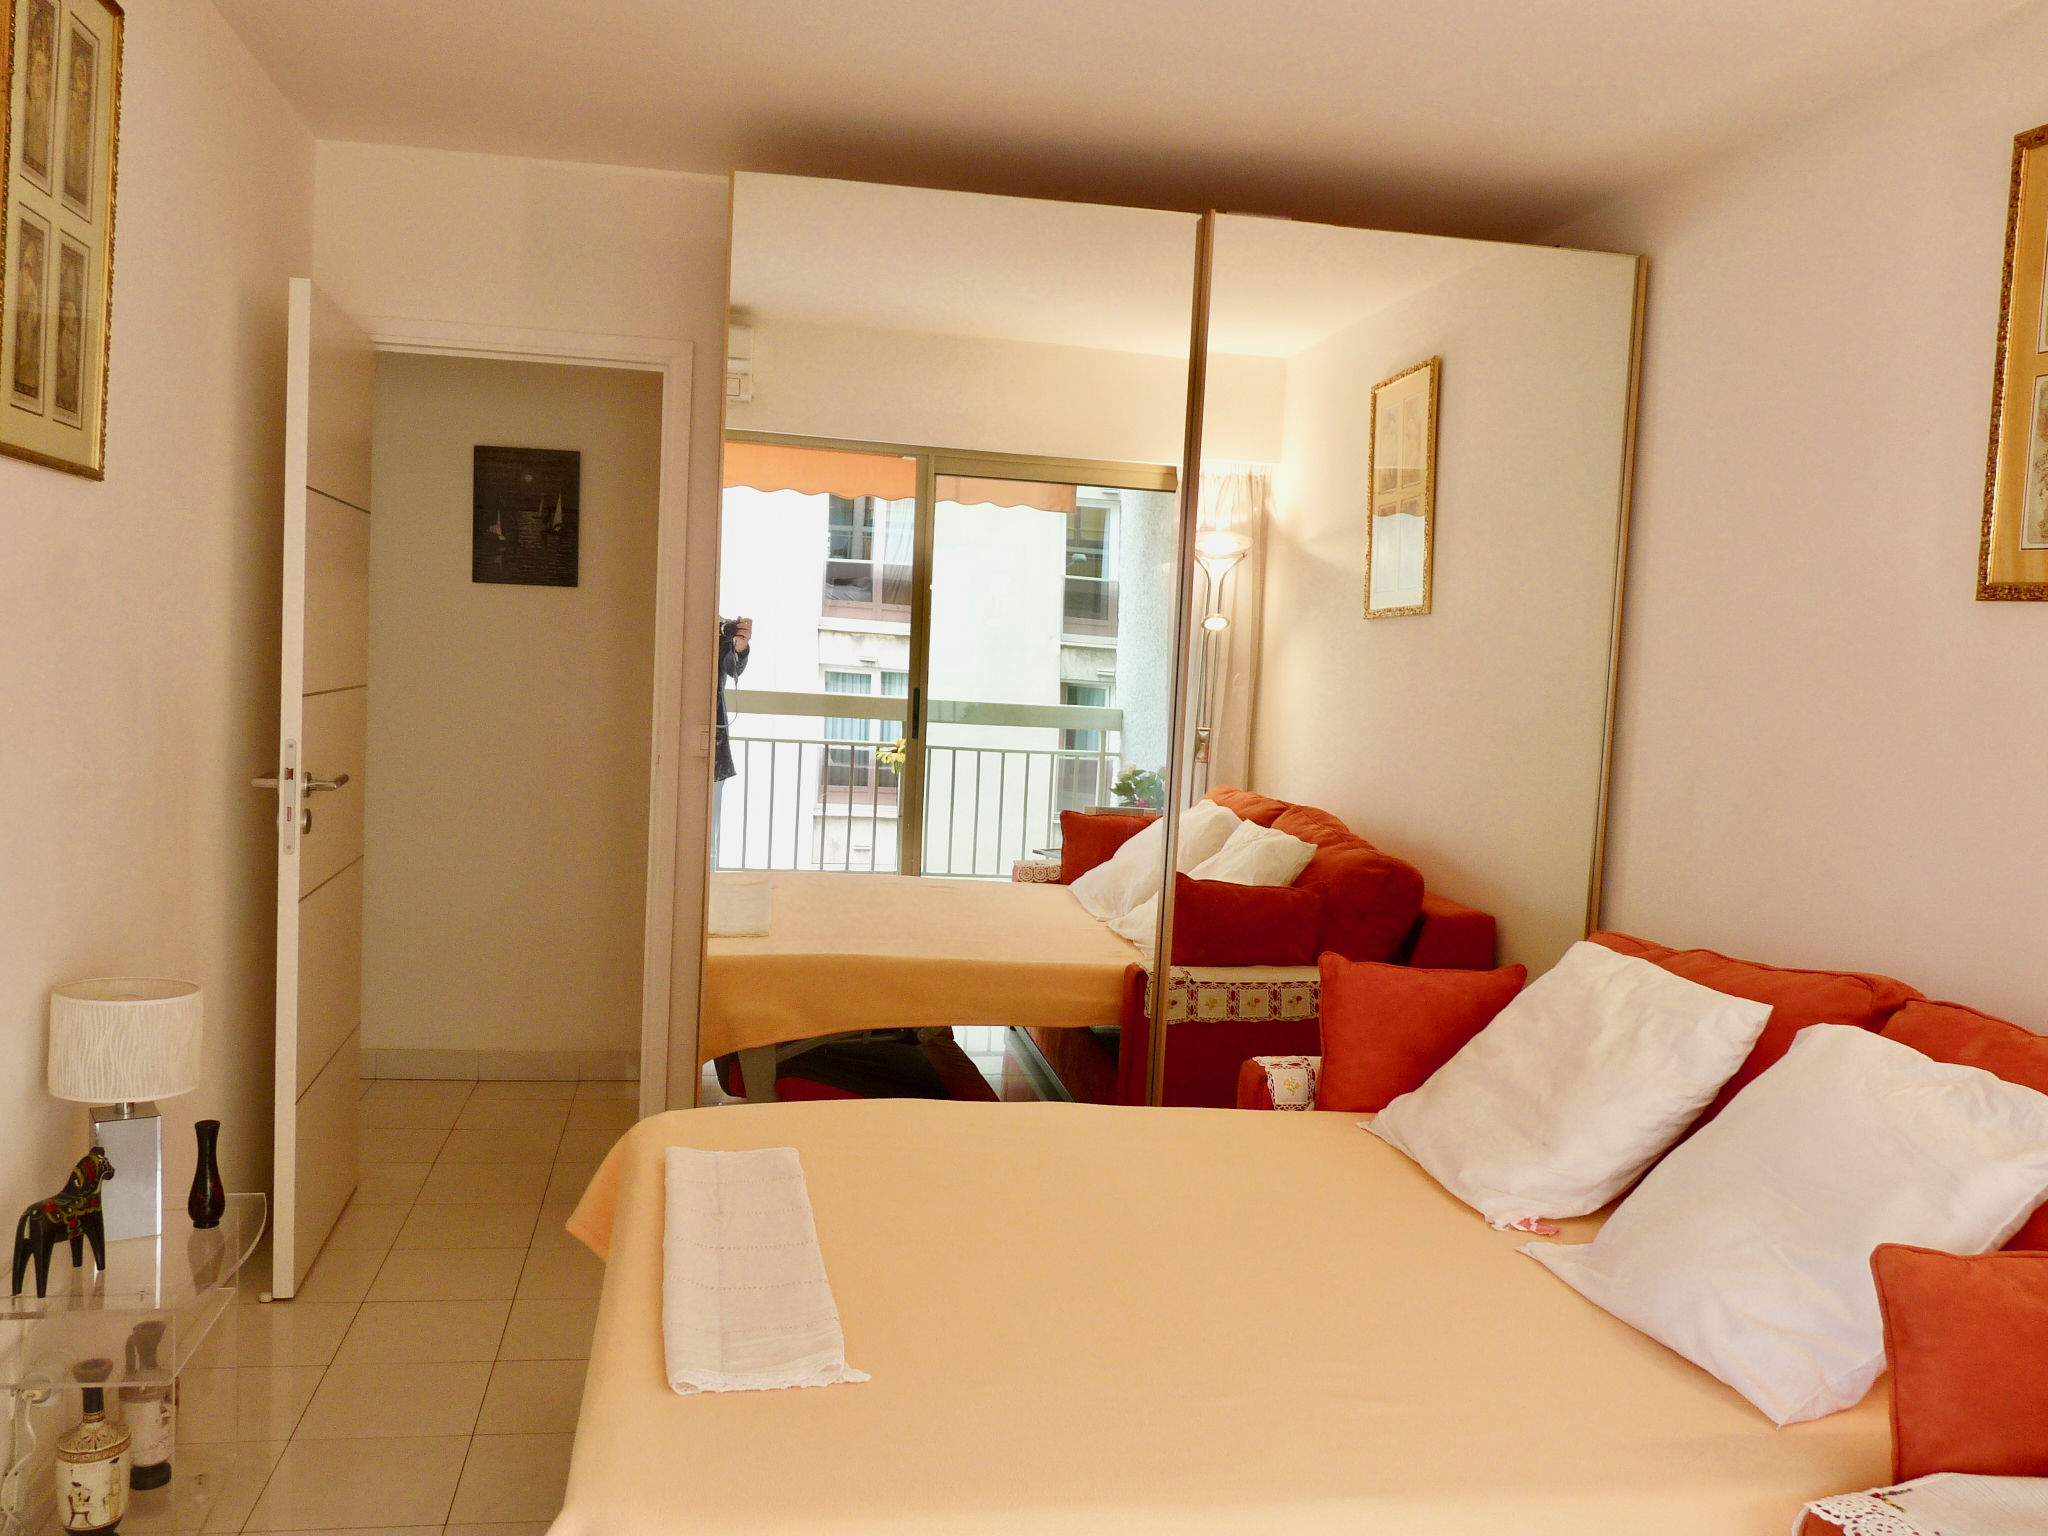 One bedroom apartment in the center of Cannes, next to the Carlton, a few meters from the Croisette - 367 1